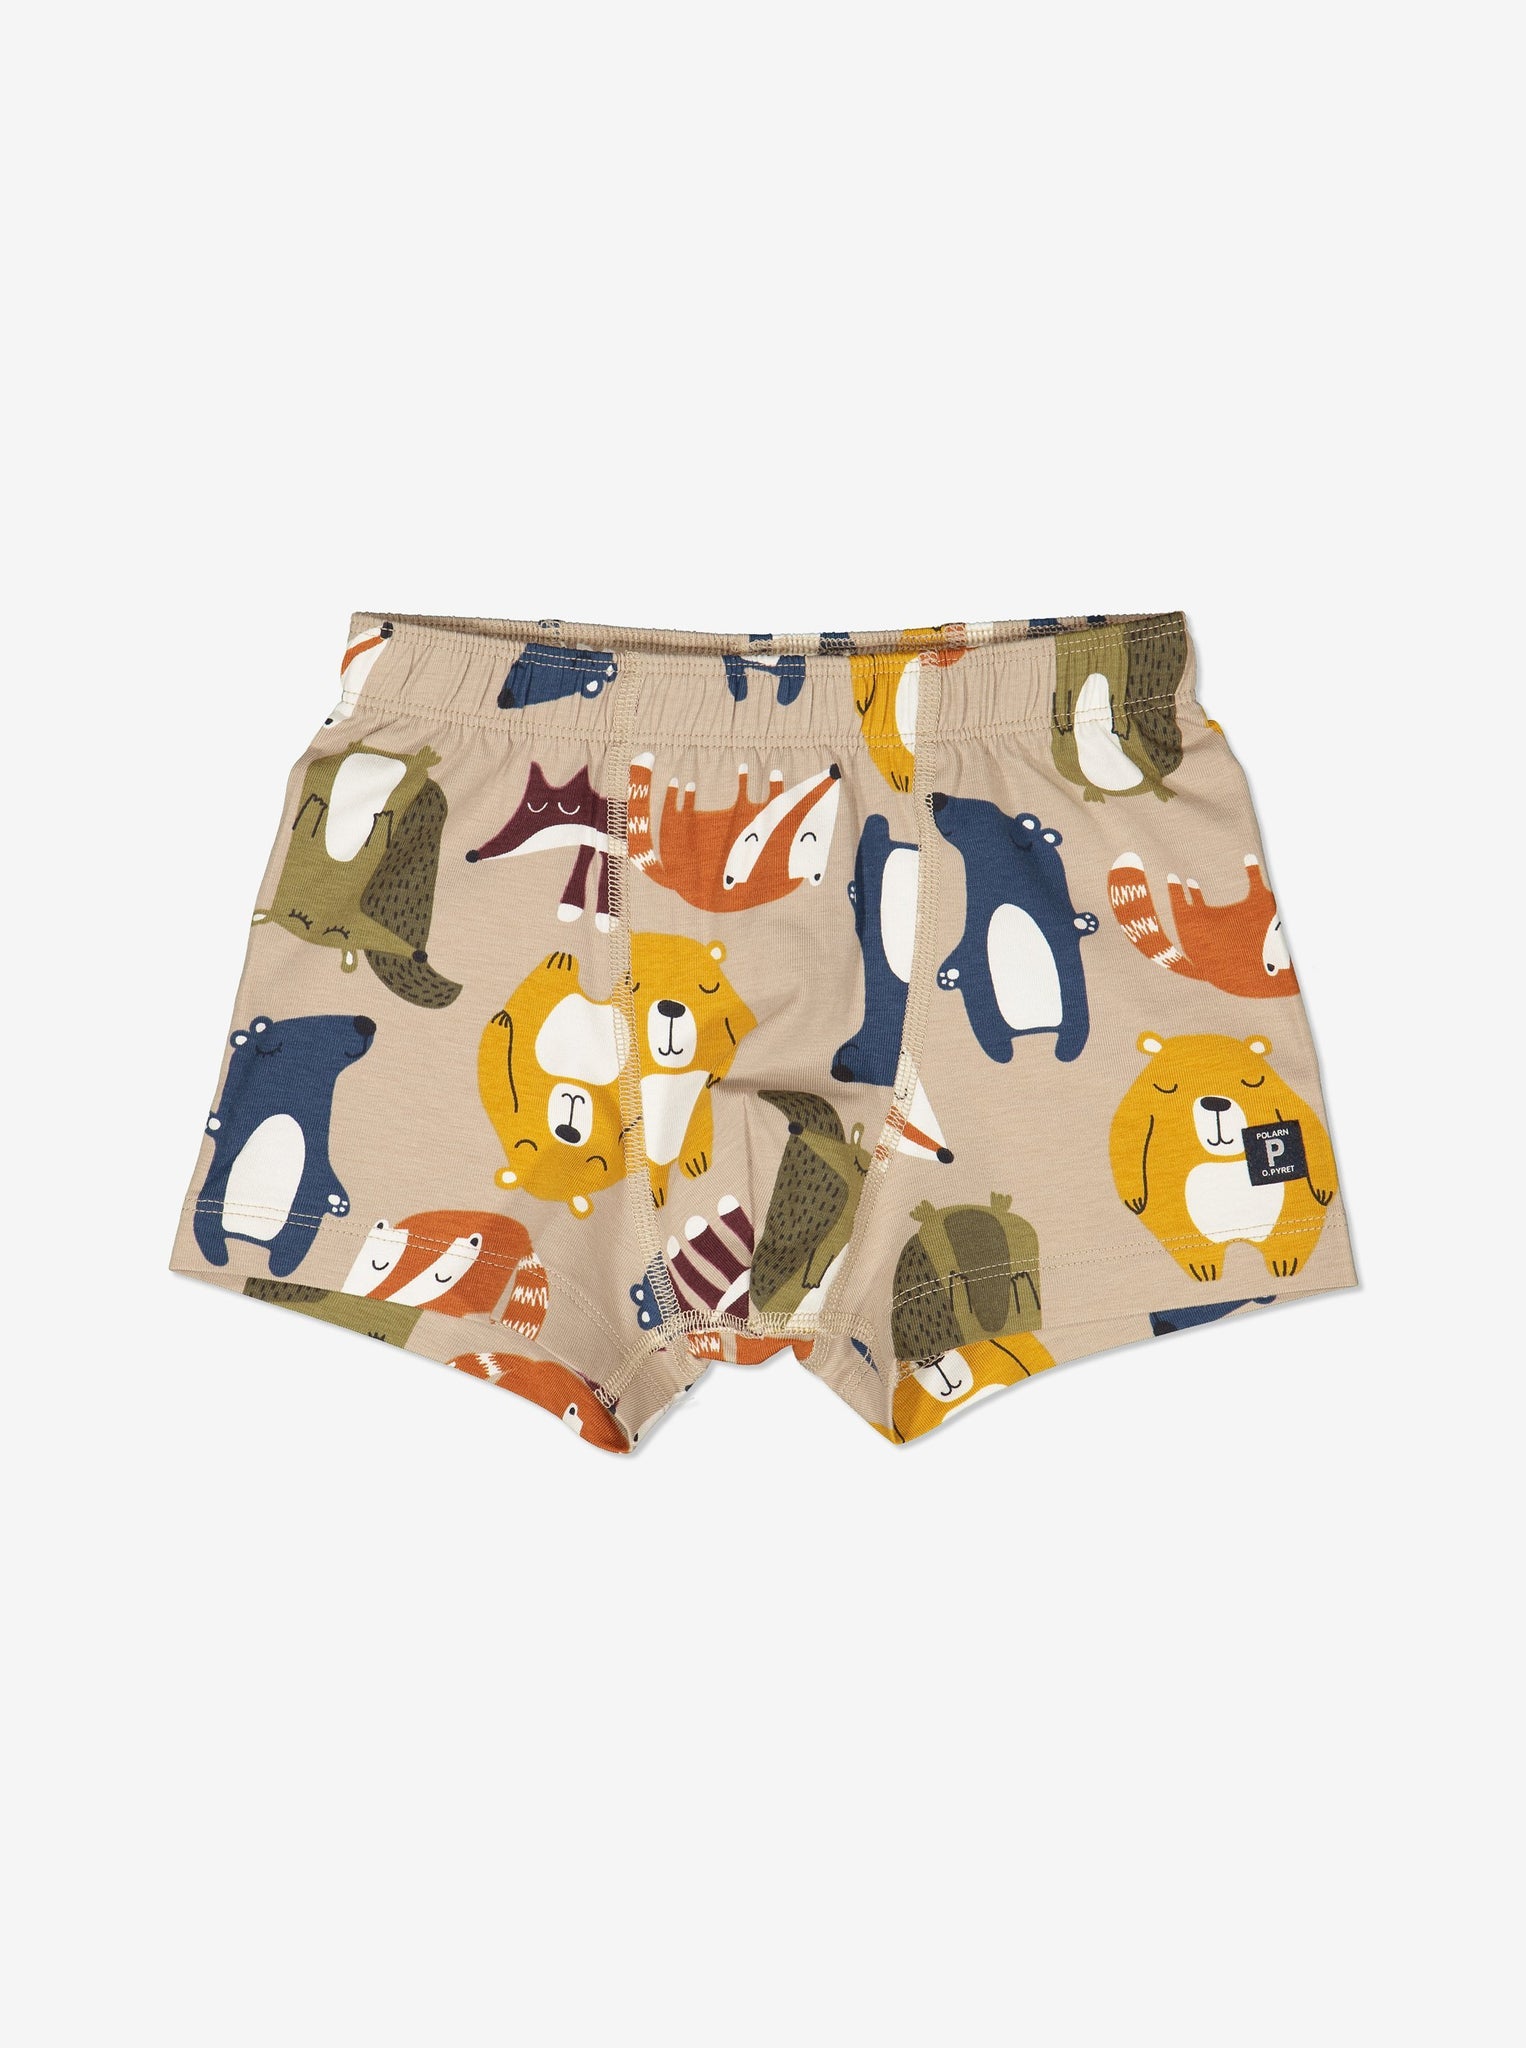 Beige boys cotton boxers printed with colourful sleepy animals, designed with flat seams. Made with organic cotton.